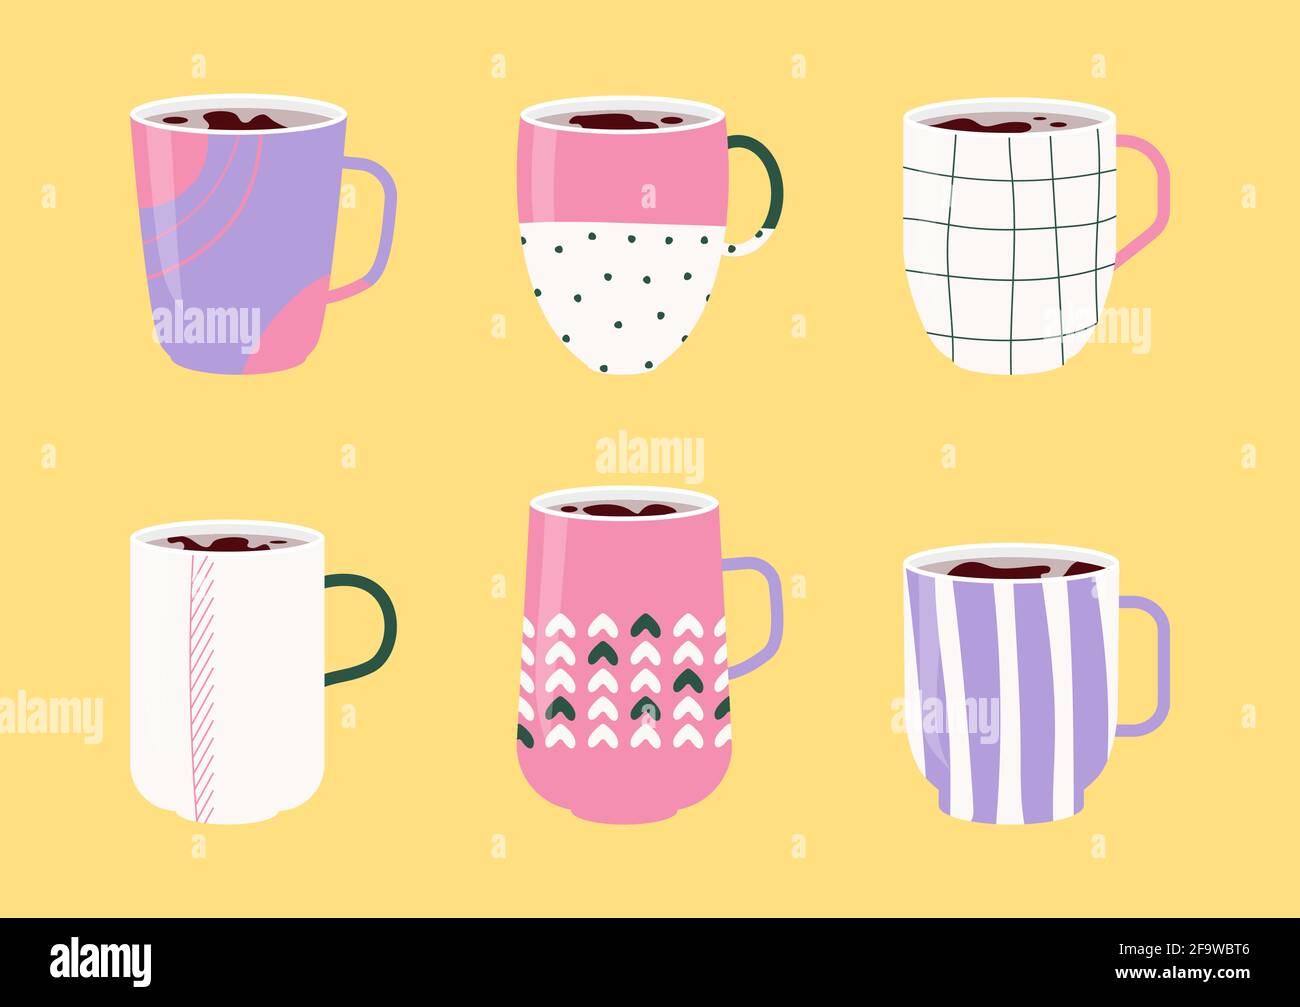 Collection colorful ceramic cups. Set icons of mugs with various ornaments filled with drink, hot tea or coffee. Doodle abstract, linear pattern on cup. Flat cartoon style design. Vector illustration Stock Vector